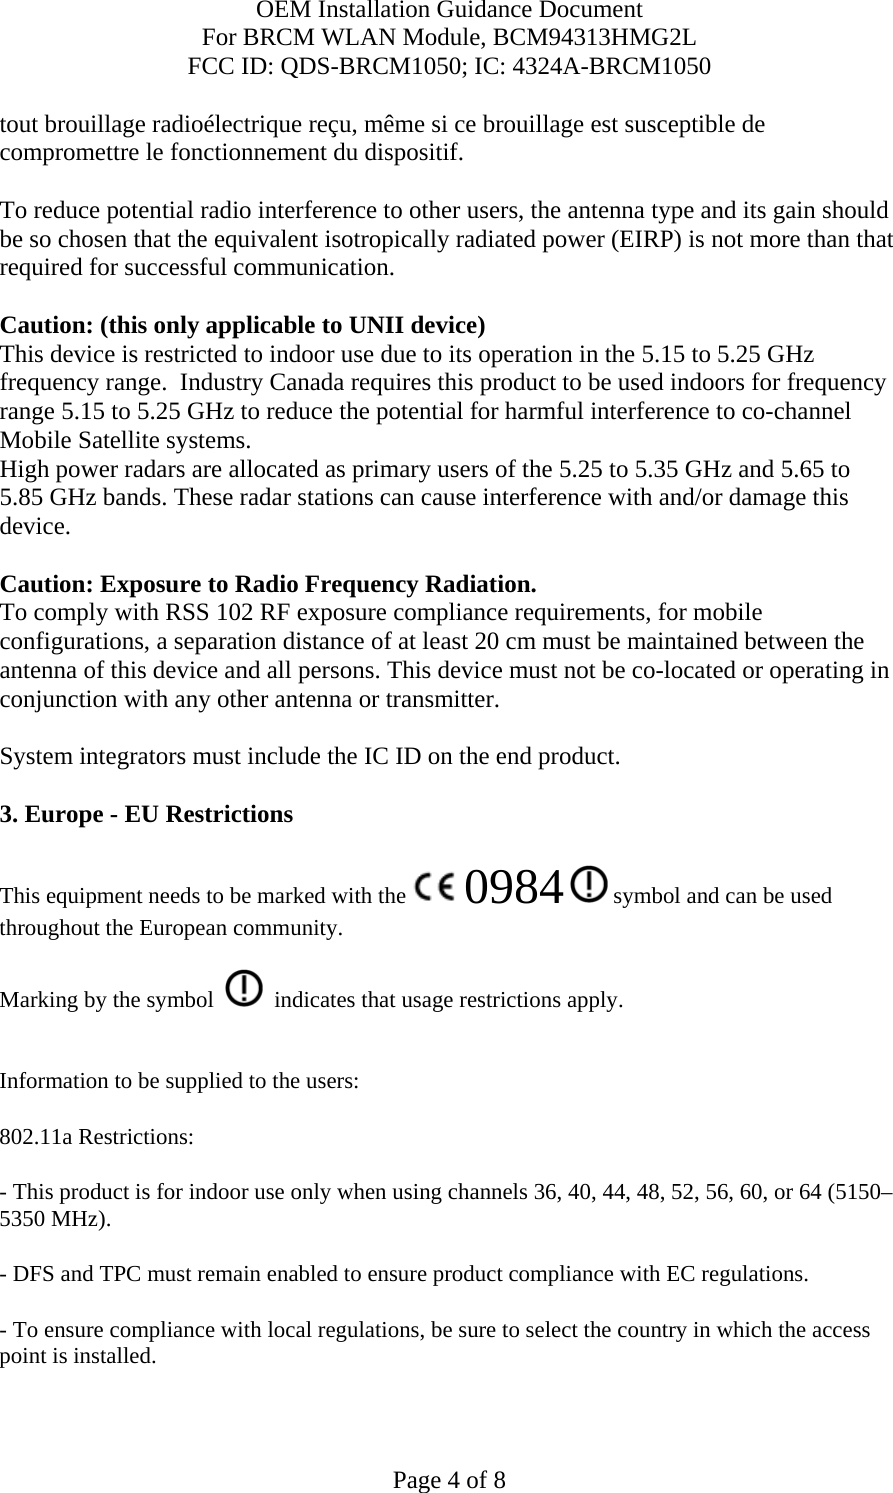 OEM Installation Guidance Document For BRCM WLAN Module, BCM94313HMG2L FCC ID: QDS-BRCM1050; IC: 4324A-BRCM1050  Page 4 of 8 tout brouillage radioélectrique reçu, même si ce brouillage est susceptible de compromettre le fonctionnement du dispositif.  To reduce potential radio interference to other users, the antenna type and its gain should be so chosen that the equivalent isotropically radiated power (EIRP) is not more than that required for successful communication.  Caution: (this only applicable to UNII device) This device is restricted to indoor use due to its operation in the 5.15 to 5.25 GHz frequency range.  Industry Canada requires this product to be used indoors for frequency range 5.15 to 5.25 GHz to reduce the potential for harmful interference to co-channel Mobile Satellite systems. High power radars are allocated as primary users of the 5.25 to 5.35 GHz and 5.65 to 5.85 GHz bands. These radar stations can cause interference with and/or damage this device.  Caution: Exposure to Radio Frequency Radiation. To comply with RSS 102 RF exposure compliance requirements, for mobile configurations, a separation distance of at least 20 cm must be maintained between the antenna of this device and all persons. This device must not be co-located or operating in conjunction with any other antenna or transmitter.  System integrators must include the IC ID on the end product.   3. Europe - EU Restrictions This equipment needs to be marked with the   0984  symbol and can be used throughout the European community.  Marking by the symbol     indicates that usage restrictions apply.  Information to be supplied to the users: 802.11a Restrictions: - This product is for indoor use only when using channels 36, 40, 44, 48, 52, 56, 60, or 64 (5150–5350 MHz).       - DFS and TPC must remain enabled to ensure product compliance with EC regulations.      - To ensure compliance with local regulations, be sure to select the country in which the access point is installed. 